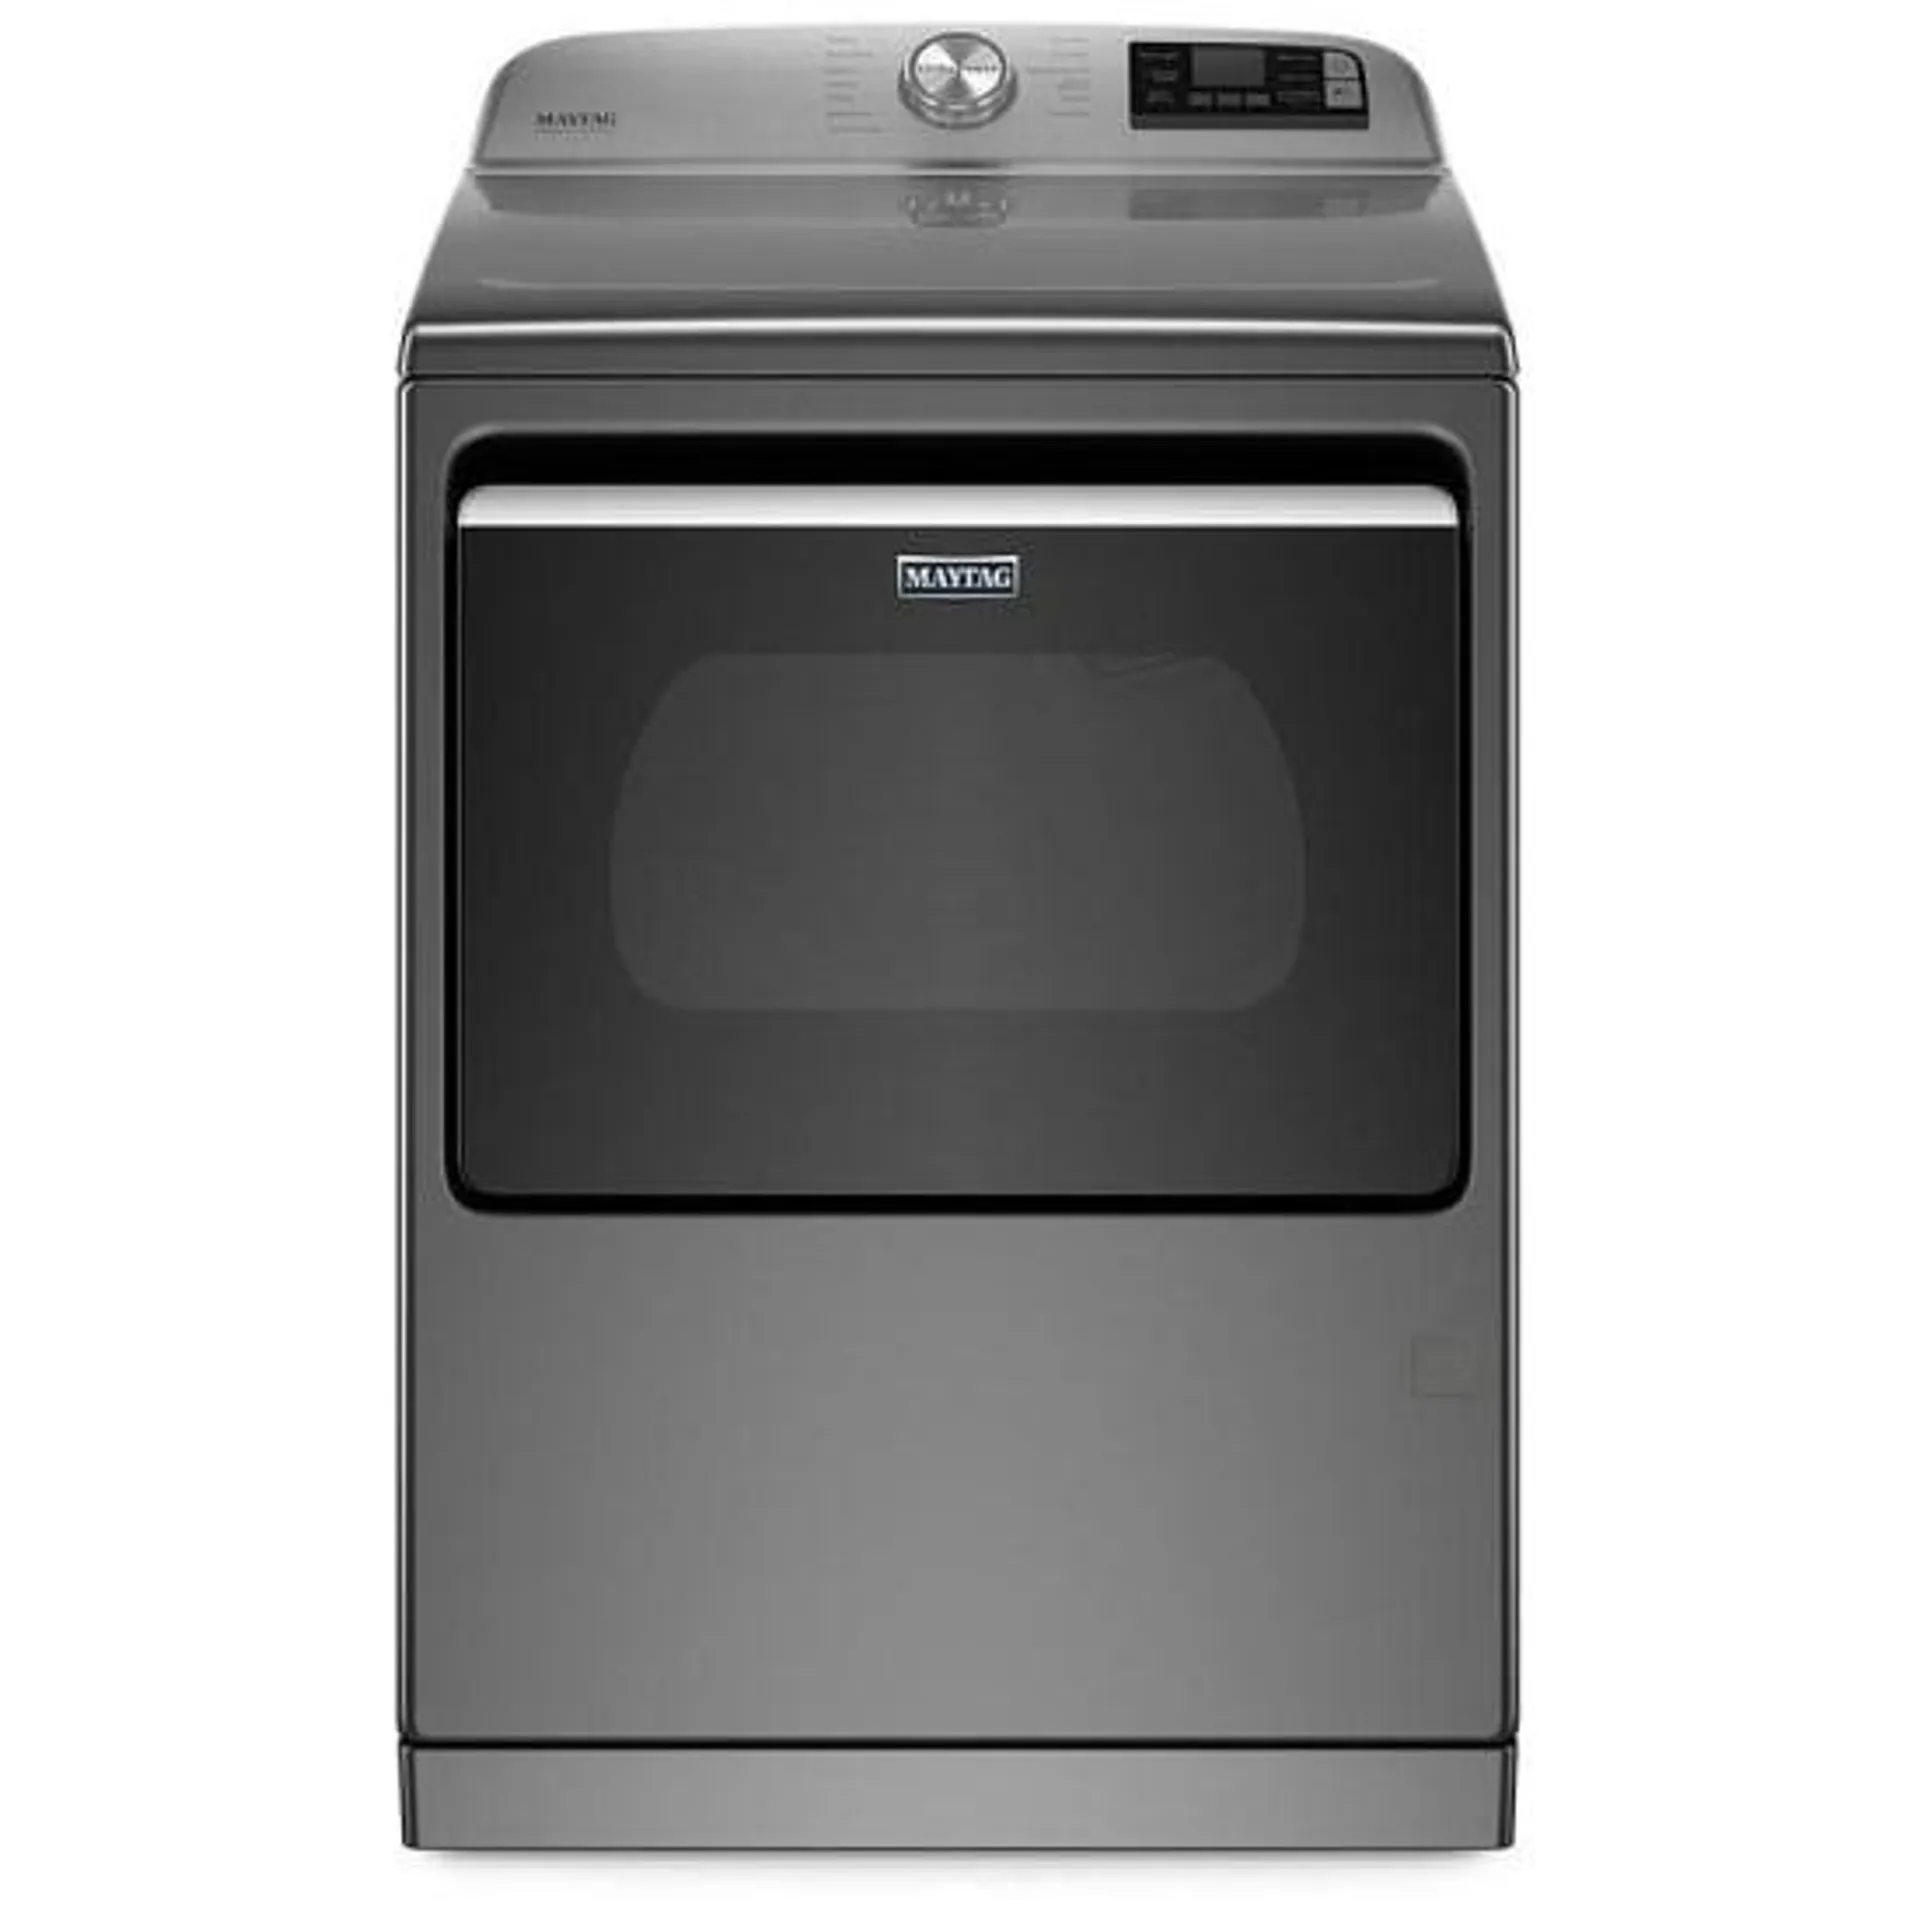 Maytag YMED7230HC Dryer, 27 inch Width, Electric, 7.4 cu. ft. Capacity, Steam Clean, 5 Temperature Settings, Steel Drum, Wifi Enabled, Metallic Slate colour